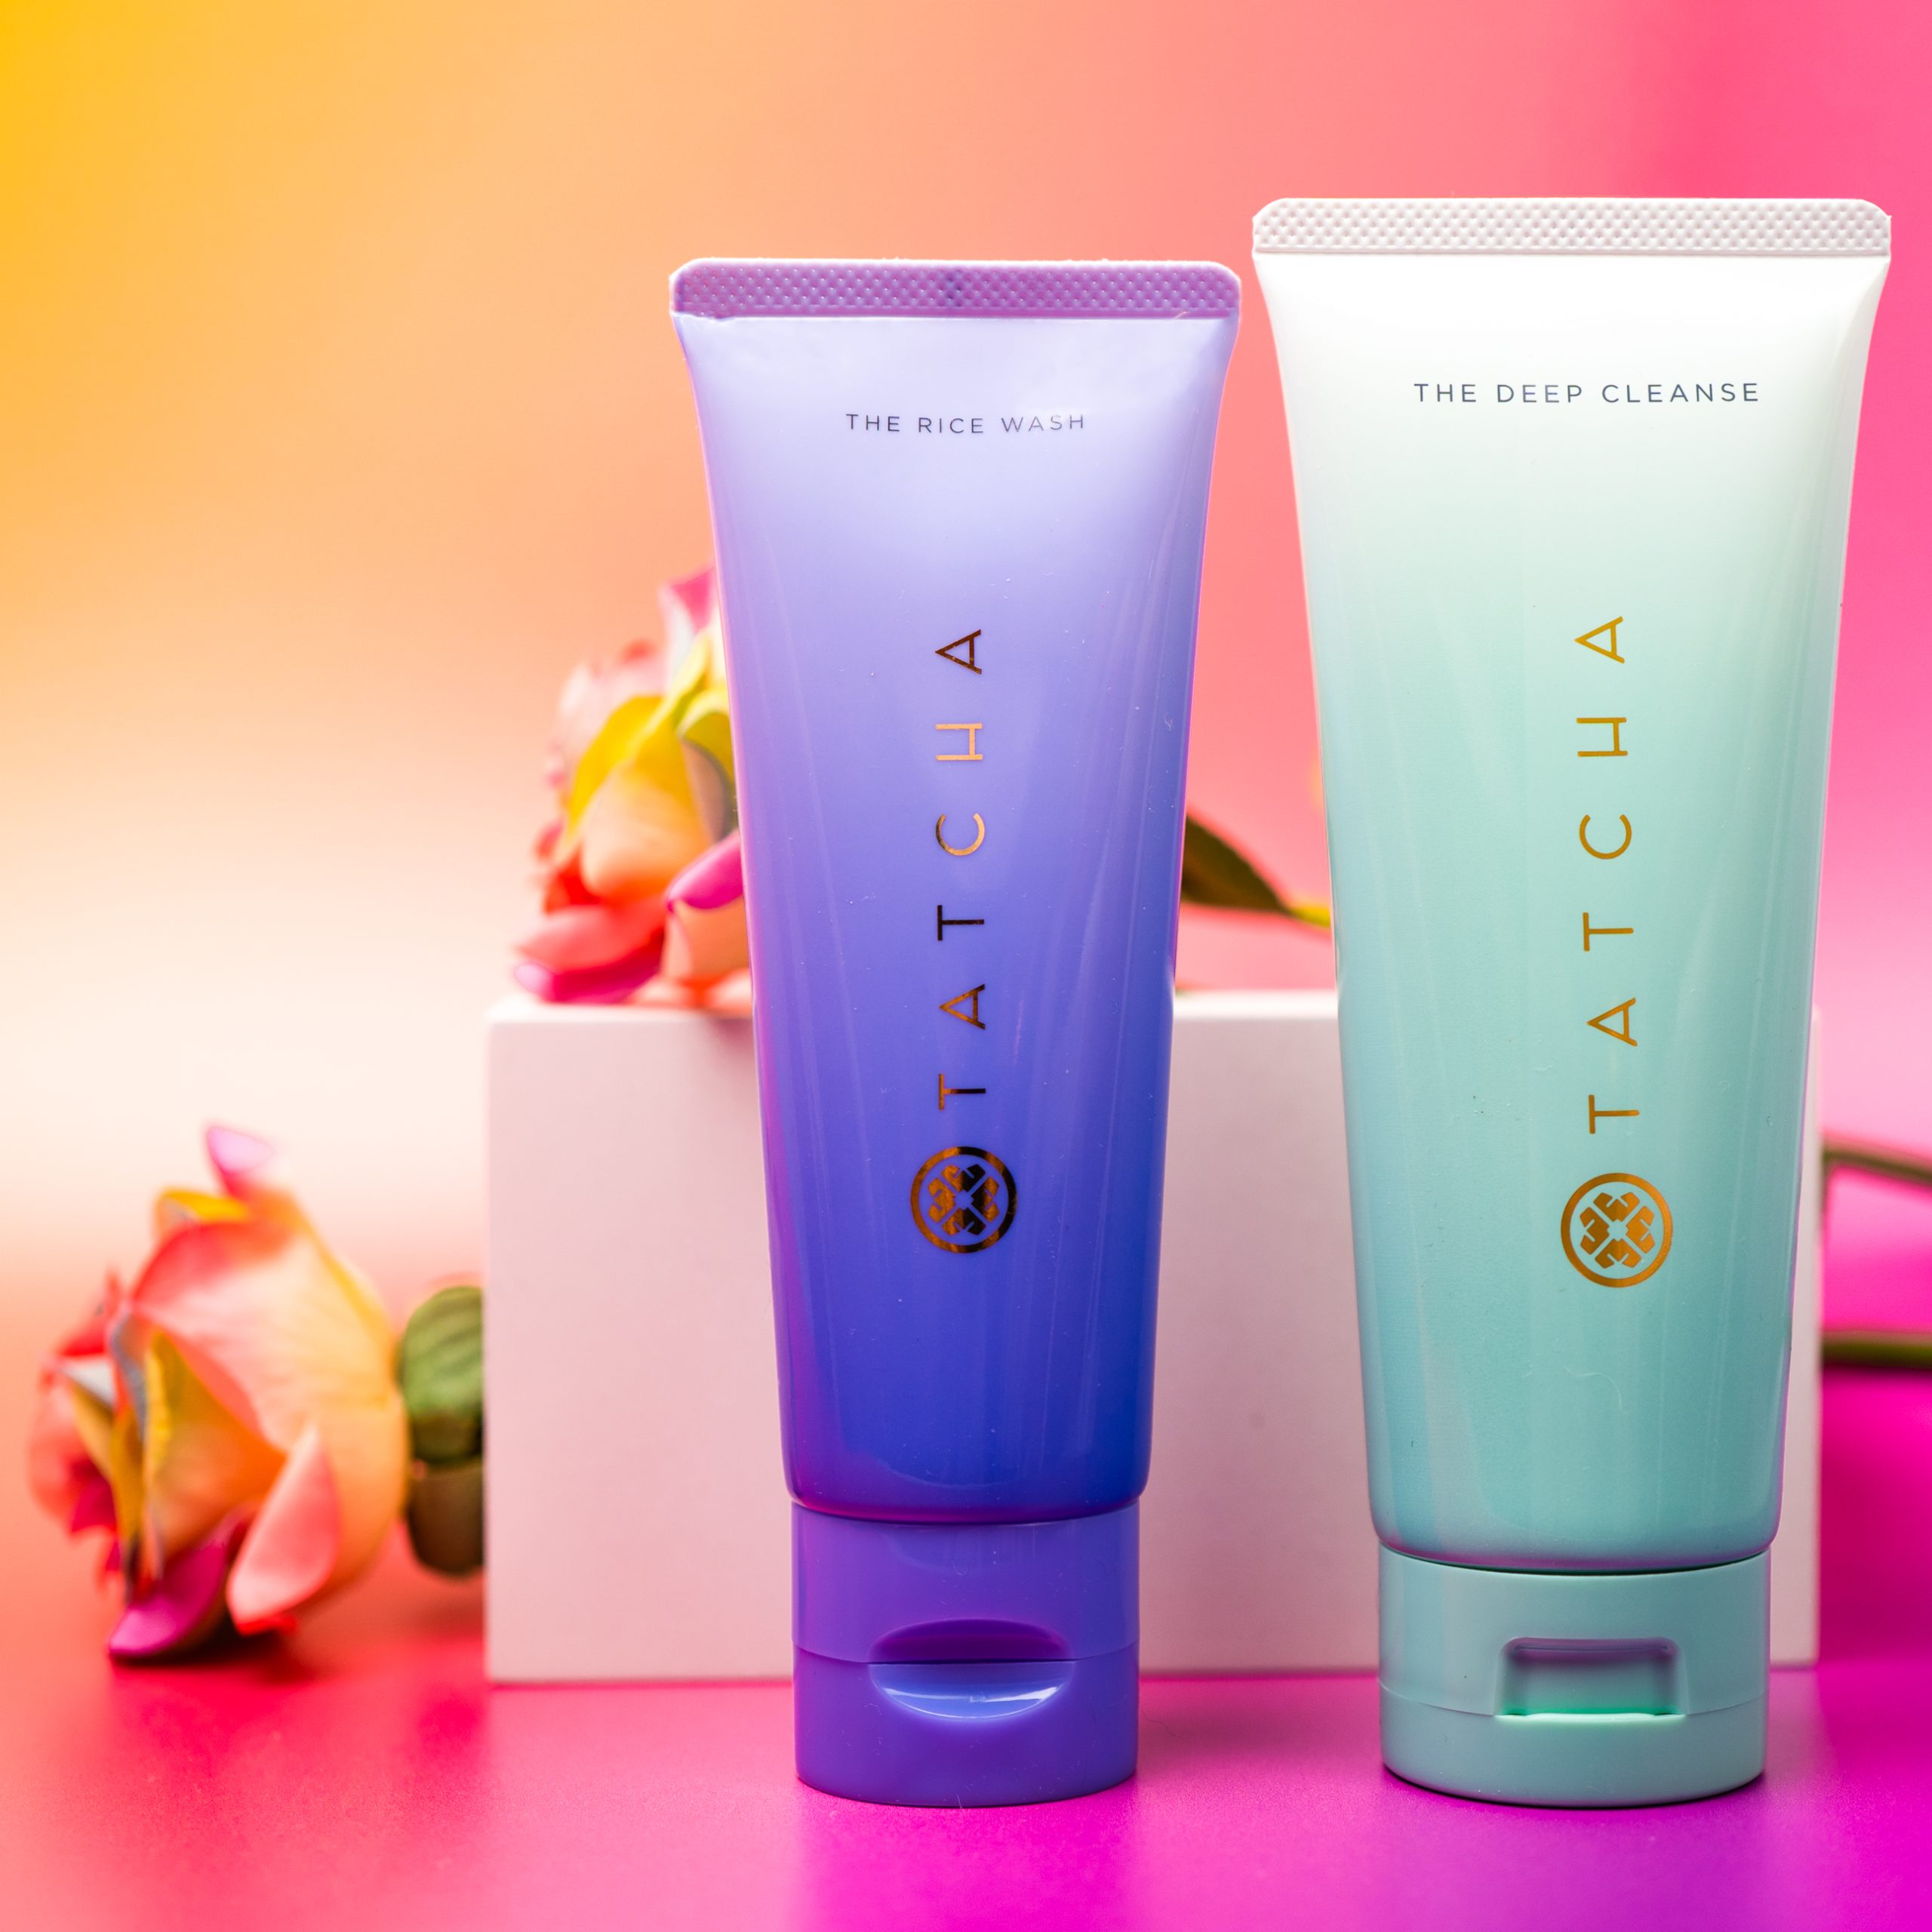 New from Tatcha: The Rice Wash and The Deep Cleanse